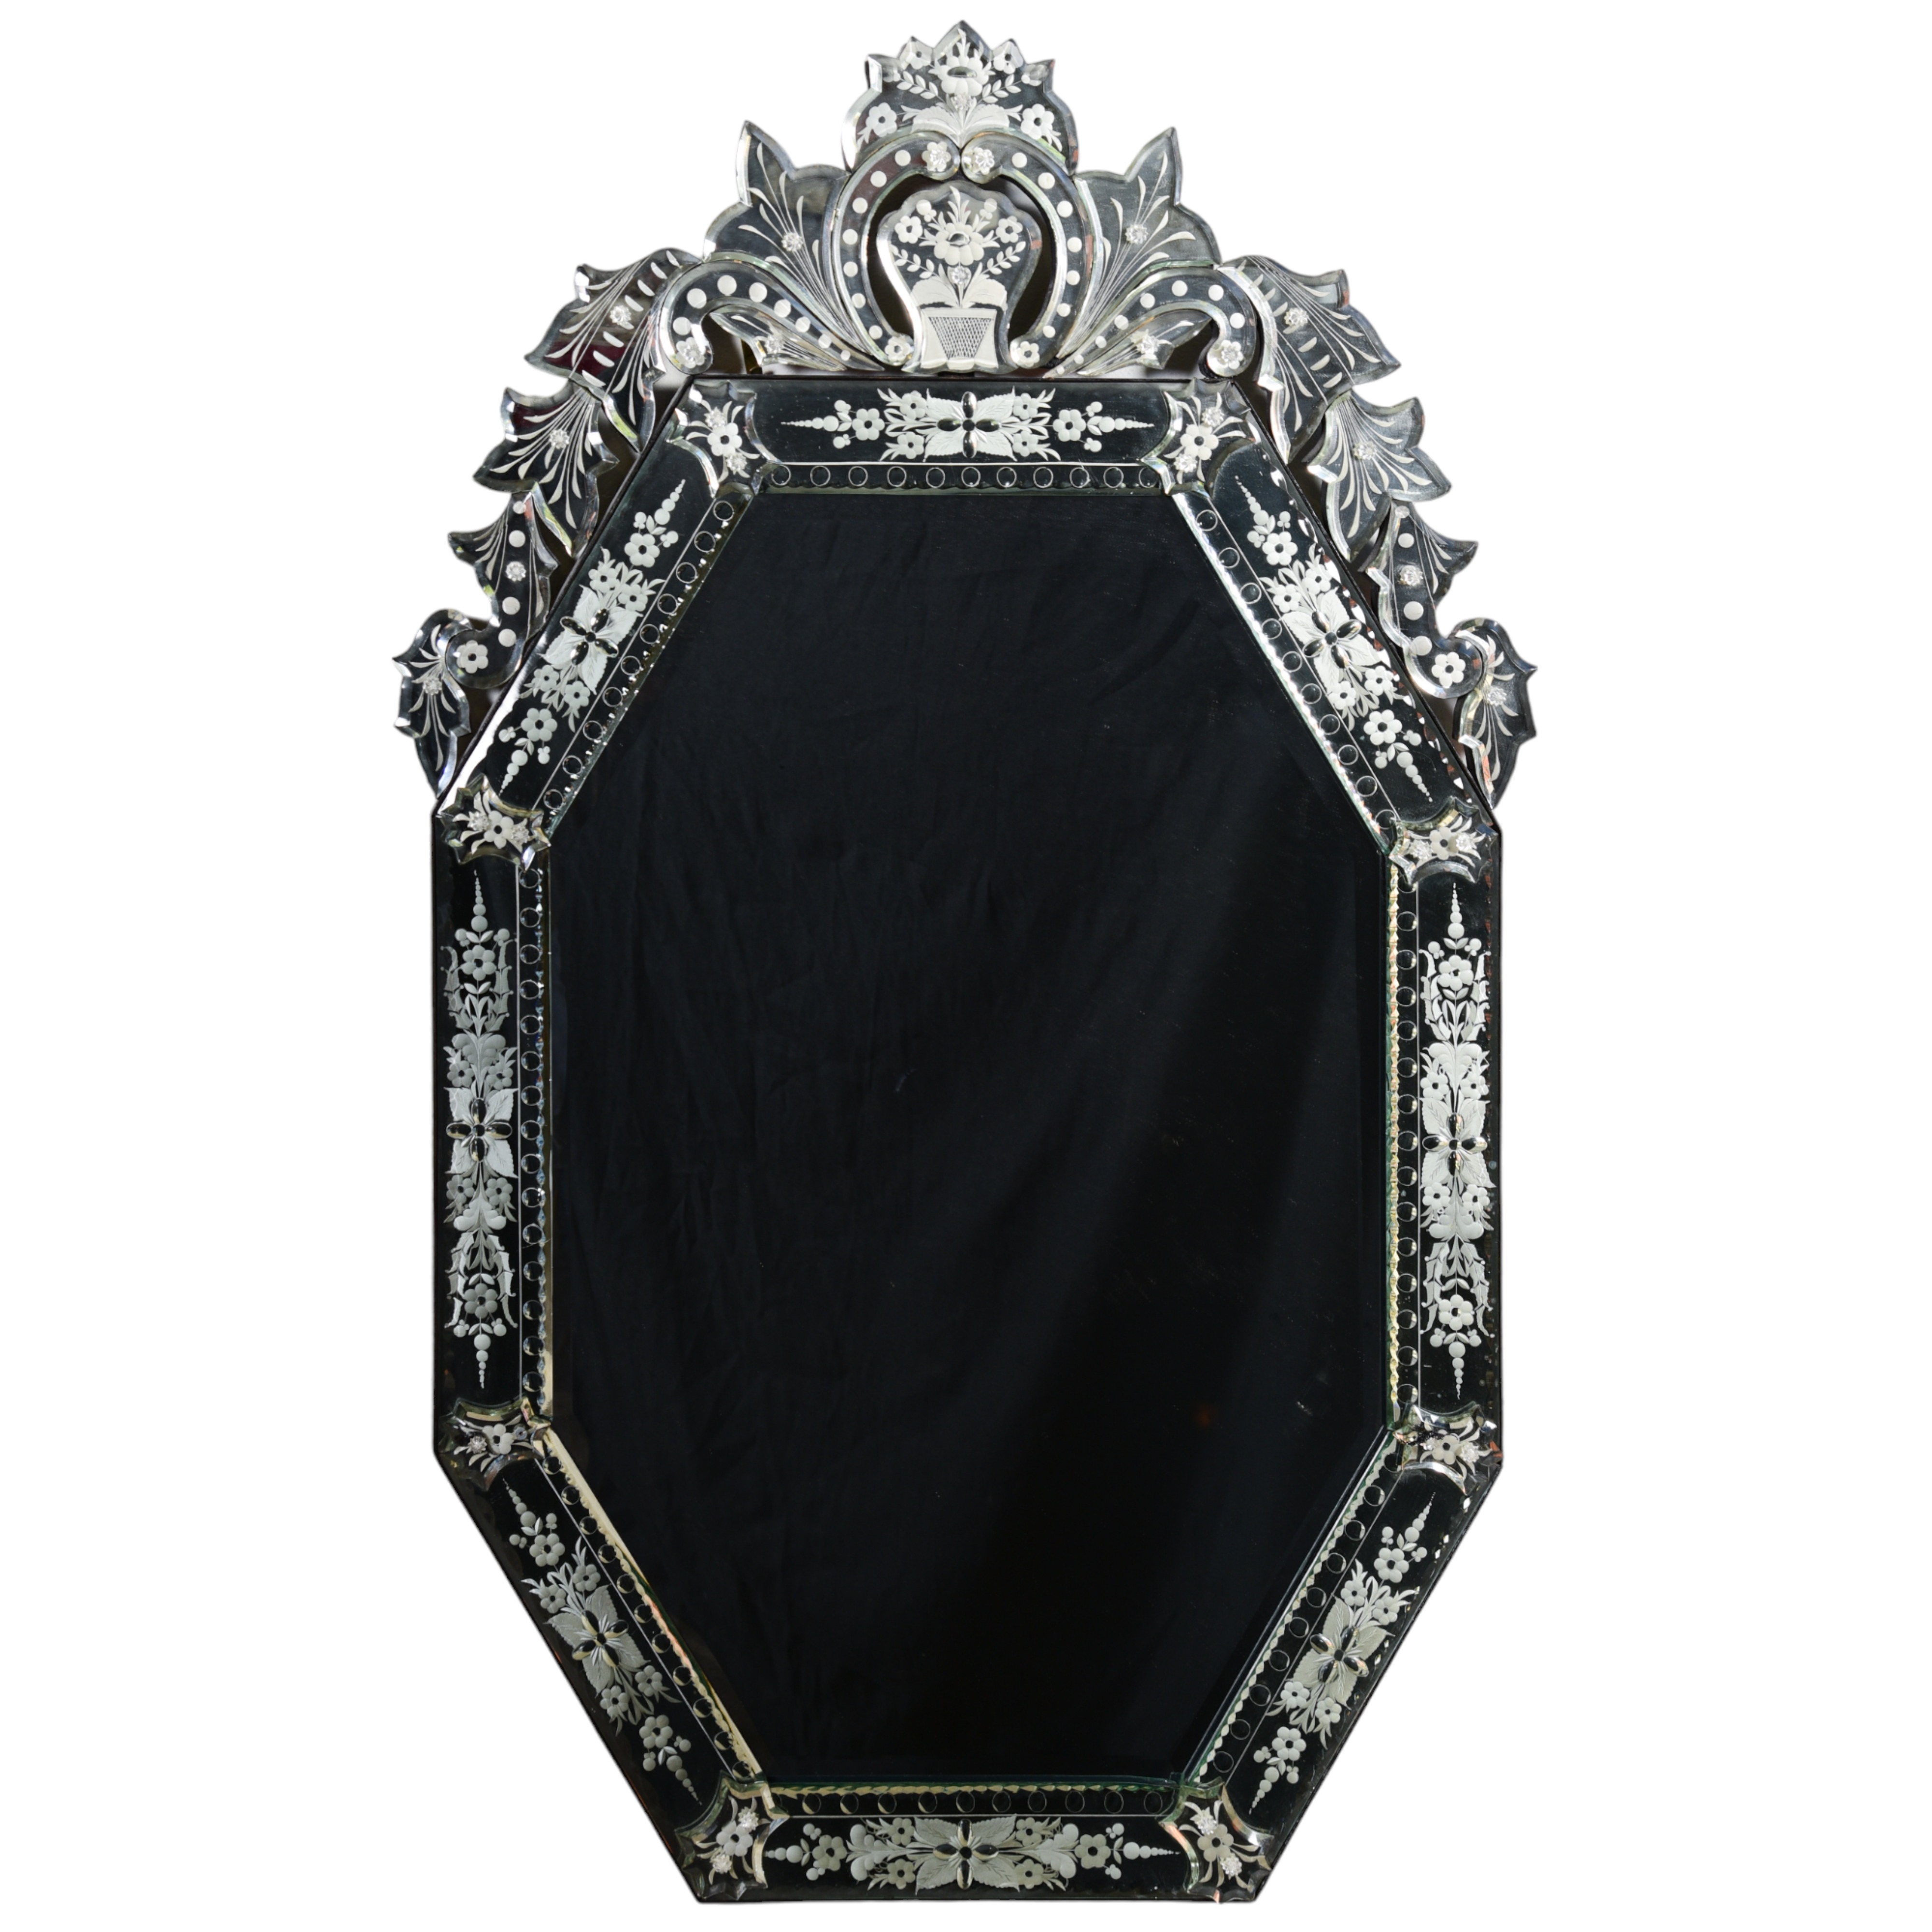 Ornate Venetian wall mirror, with